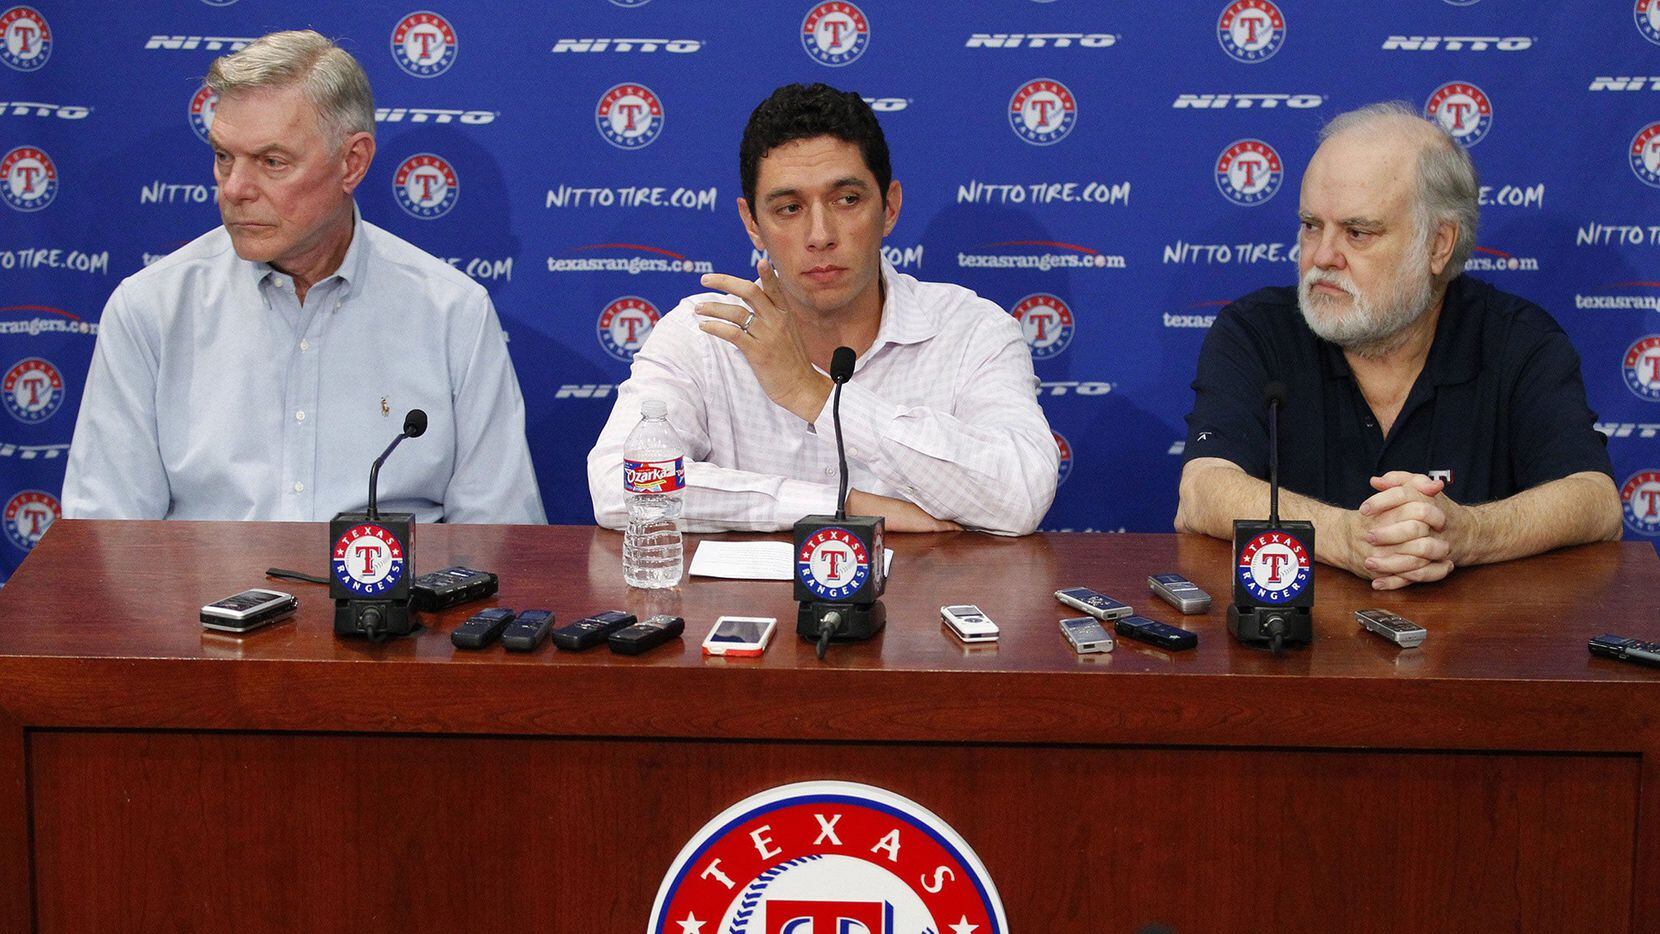 Texas Rangers owners Ray Davis, left, and Bob Simpson, right, flank President of Baseball Operations and General Manager Jon Daniels at a news conference at Globe Life Park in Arlington, Texas, on Sept. 5, 2014. (Richard W. Rodriguez/Fort Worth Star-Telegram/TNS)